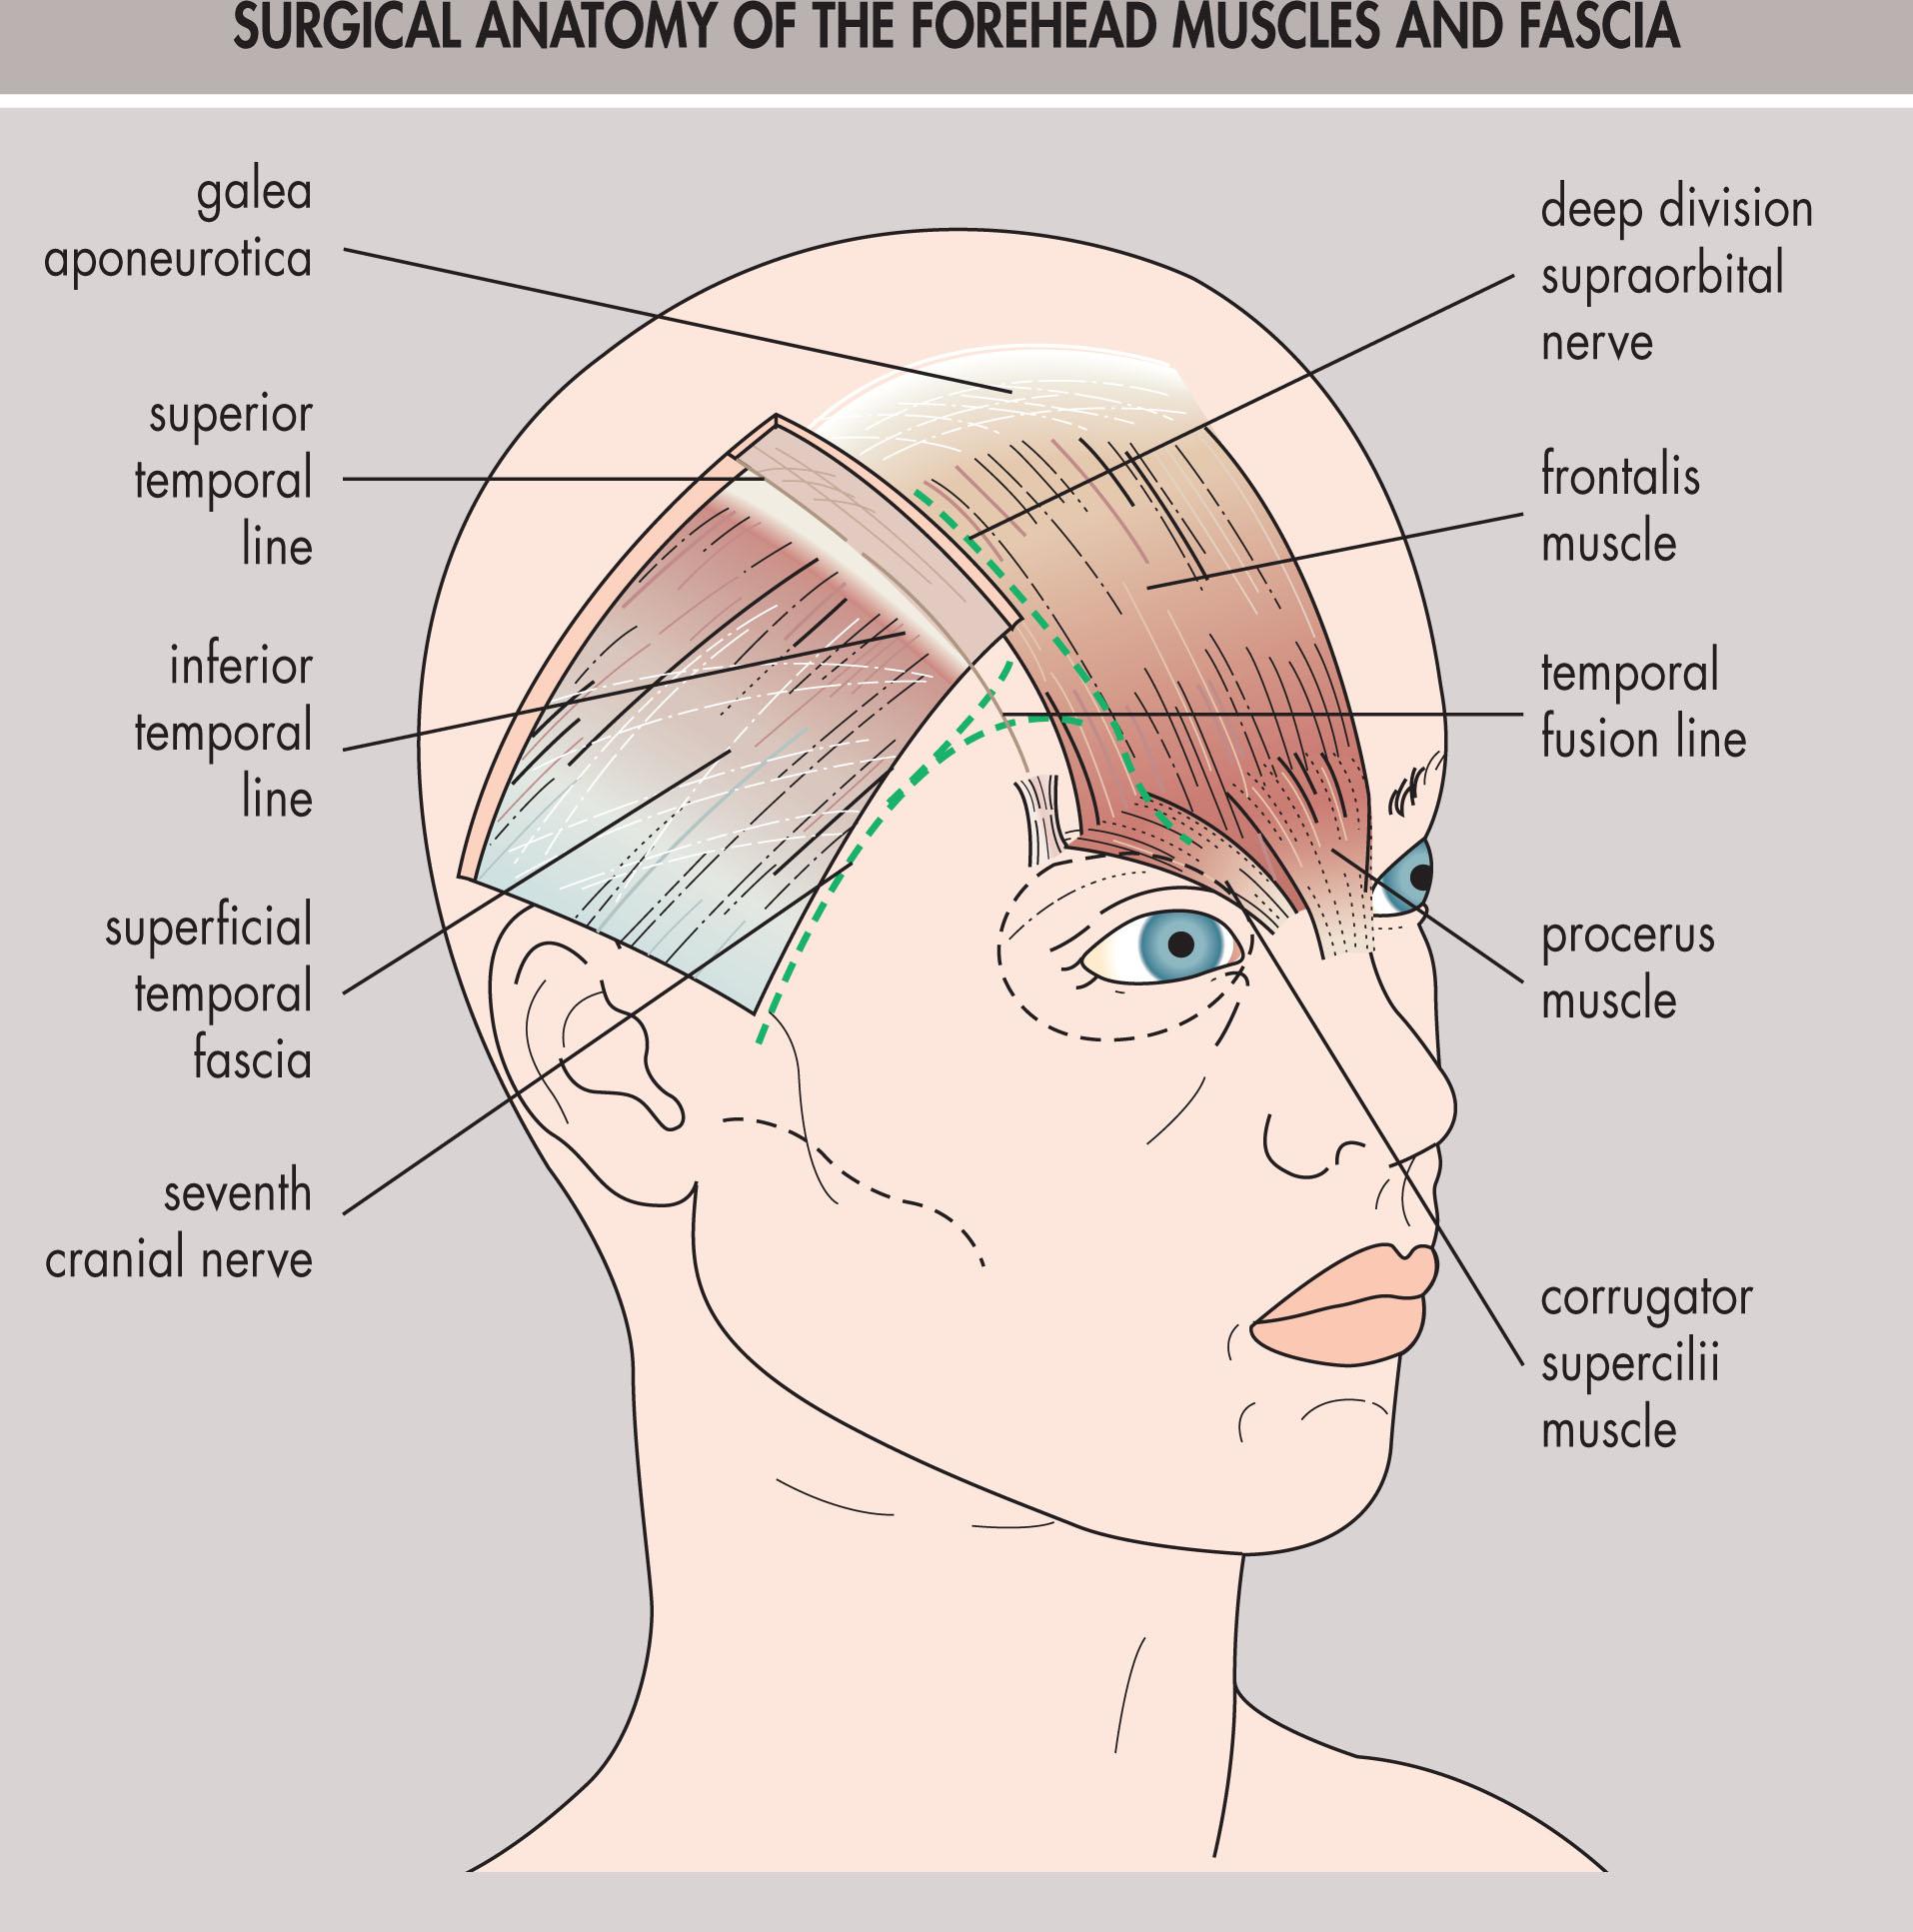 Fig. 12.15.3, Surgical Anatomy of the Forehead Muscles and Fascia.